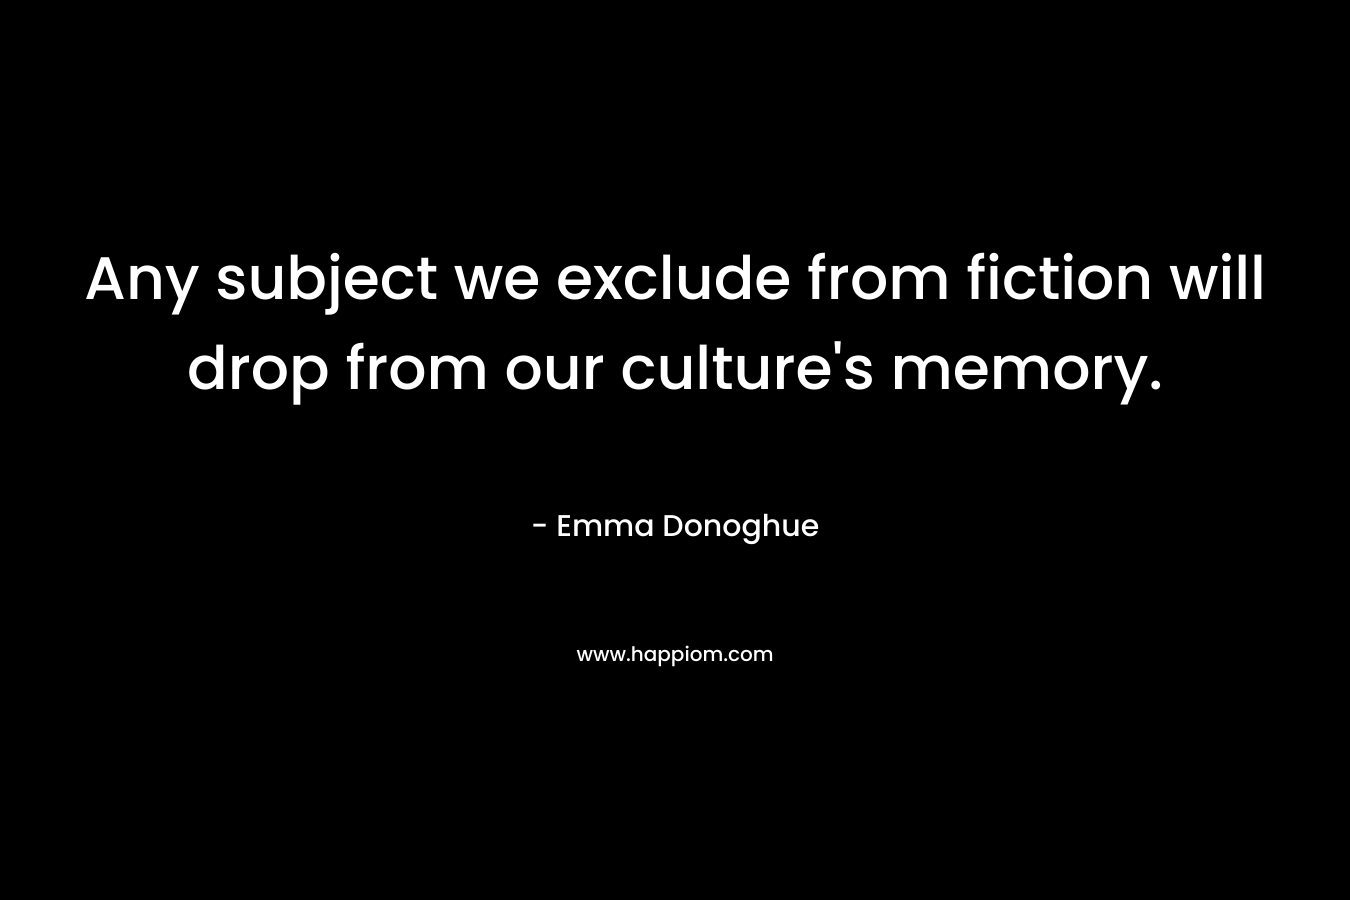 Any subject we exclude from fiction will drop from our culture's memory.